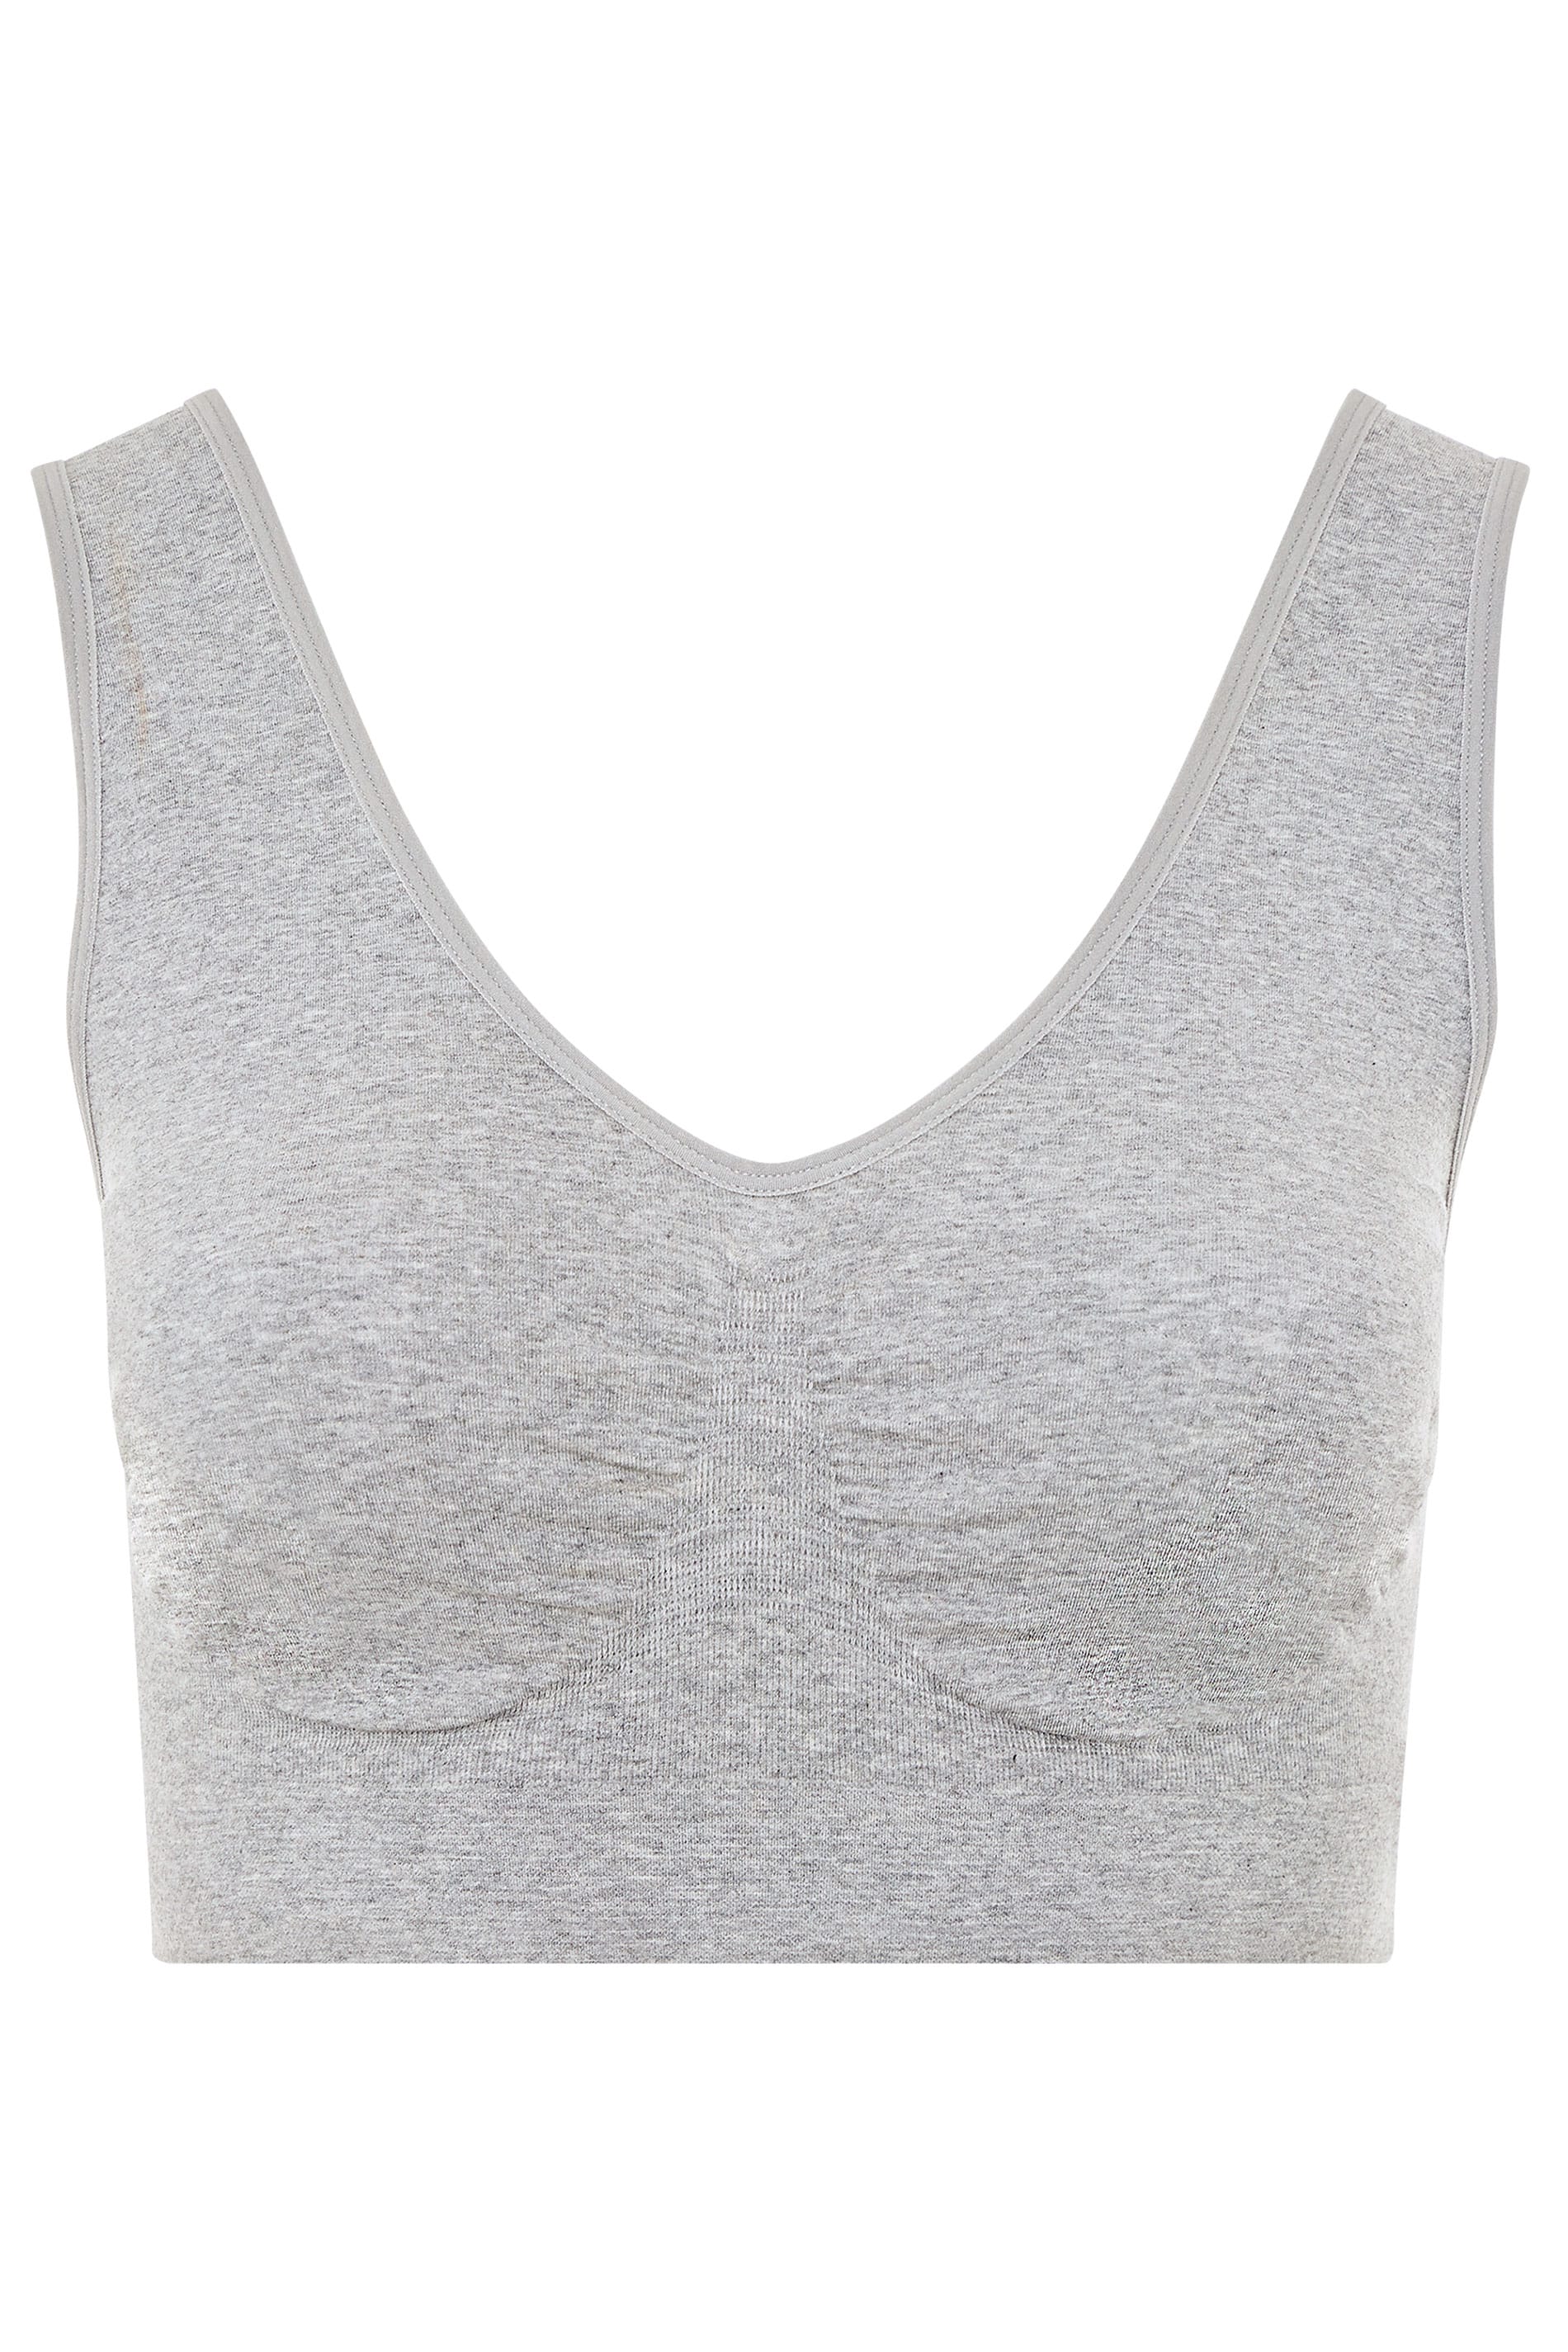 Grey Seamless Padded Non-Wired Bralette, Yours Clothing